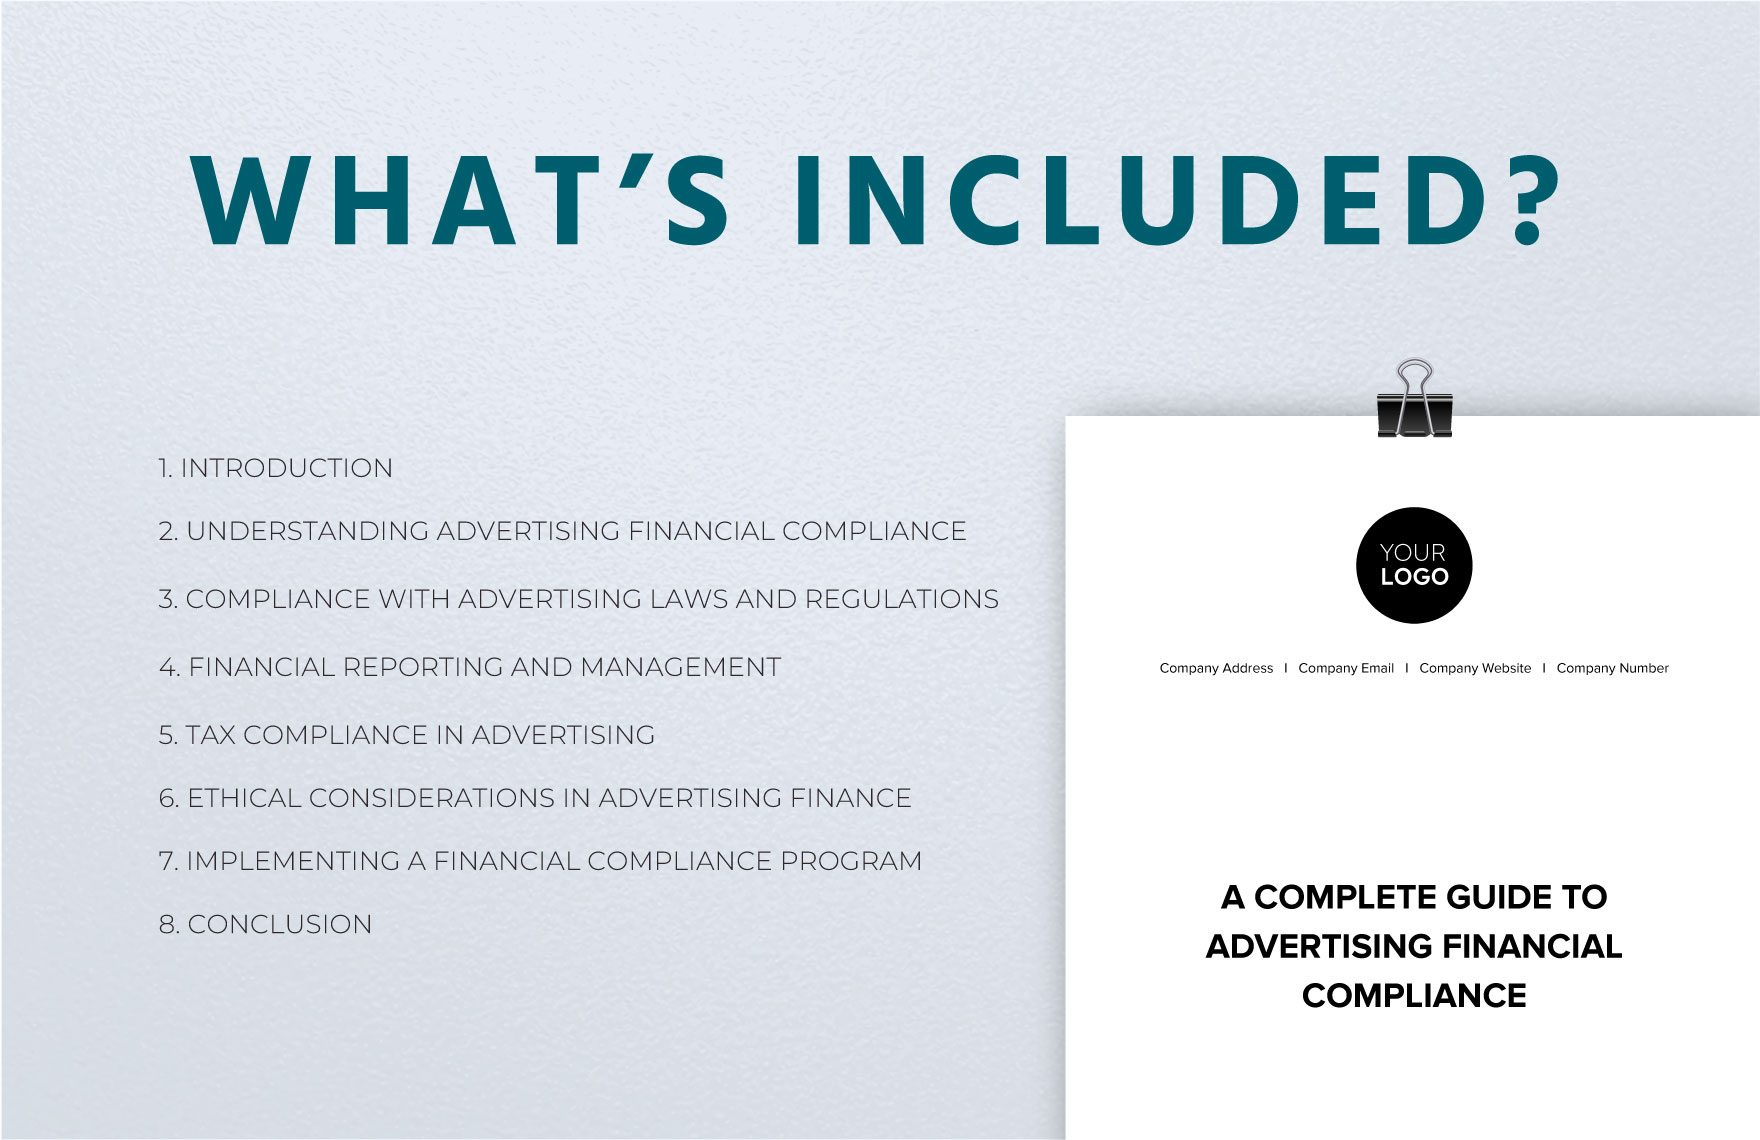 Complete Guide to Advertising Financial Compliance Template